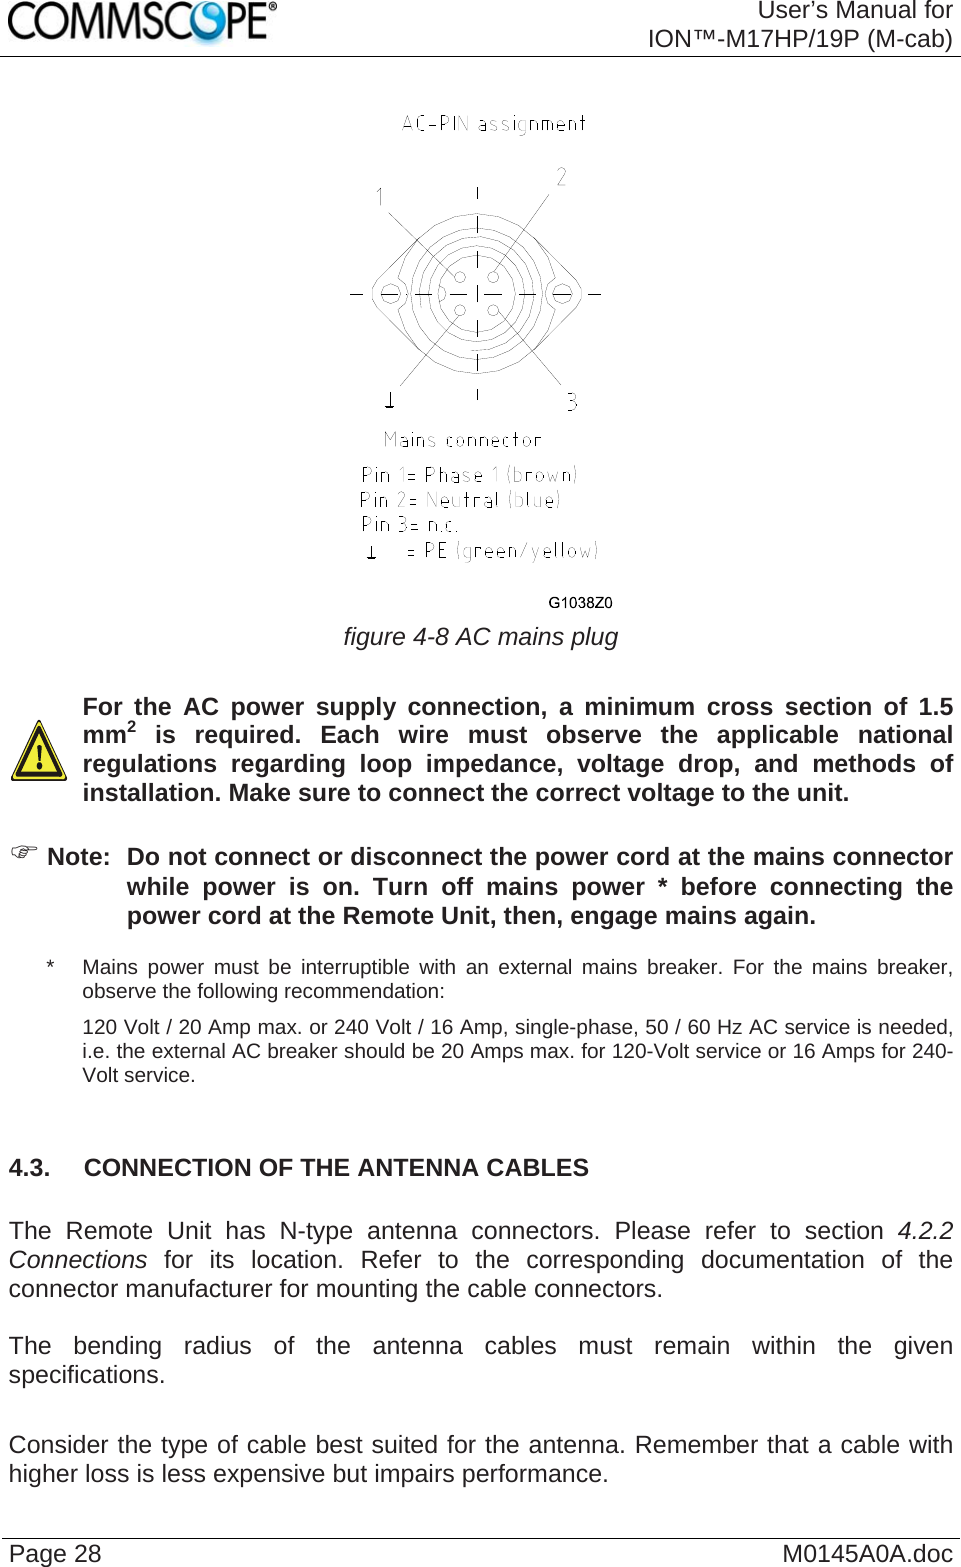  User’s Manual forION™-M17HP/19P (M-cab) Page 28  M0145A0A.doc  figure 4-8 AC mains plug    For the AC power supply connection, a minimum cross section of 1.5 mm2 is required. Each wire must observe the applicable national regulations regarding loop impedance, voltage drop, and methods of installation. Make sure to connect the correct voltage to the unit.  ) Note:  Do not connect or disconnect the power cord at the mains connector while power is on. Turn off mains power * before connecting the power cord at the Remote Unit, then, engage mains again. *   Mains power must be interruptible with an external mains breaker. For the mains breaker, observe the following recommendation: 120 Volt / 20 Amp max. or 240 Volt / 16 Amp, single-phase, 50 / 60 Hz AC service is needed, i.e. the external AC breaker should be 20 Amps max. for 120-Volt service or 16 Amps for 240-Volt service.  4.3.  CONNECTION OF THE ANTENNA CABLES  The Remote Unit has N-type antenna connectors. Please refer to section 4.2.2 Connections for its location. Refer to the corresponding documentation of the connector manufacturer for mounting the cable connectors.   The bending radius of the antenna cables must remain within the given specifications.   Consider the type of cable best suited for the antenna. Remember that a cable with higher loss is less expensive but impairs performance.  